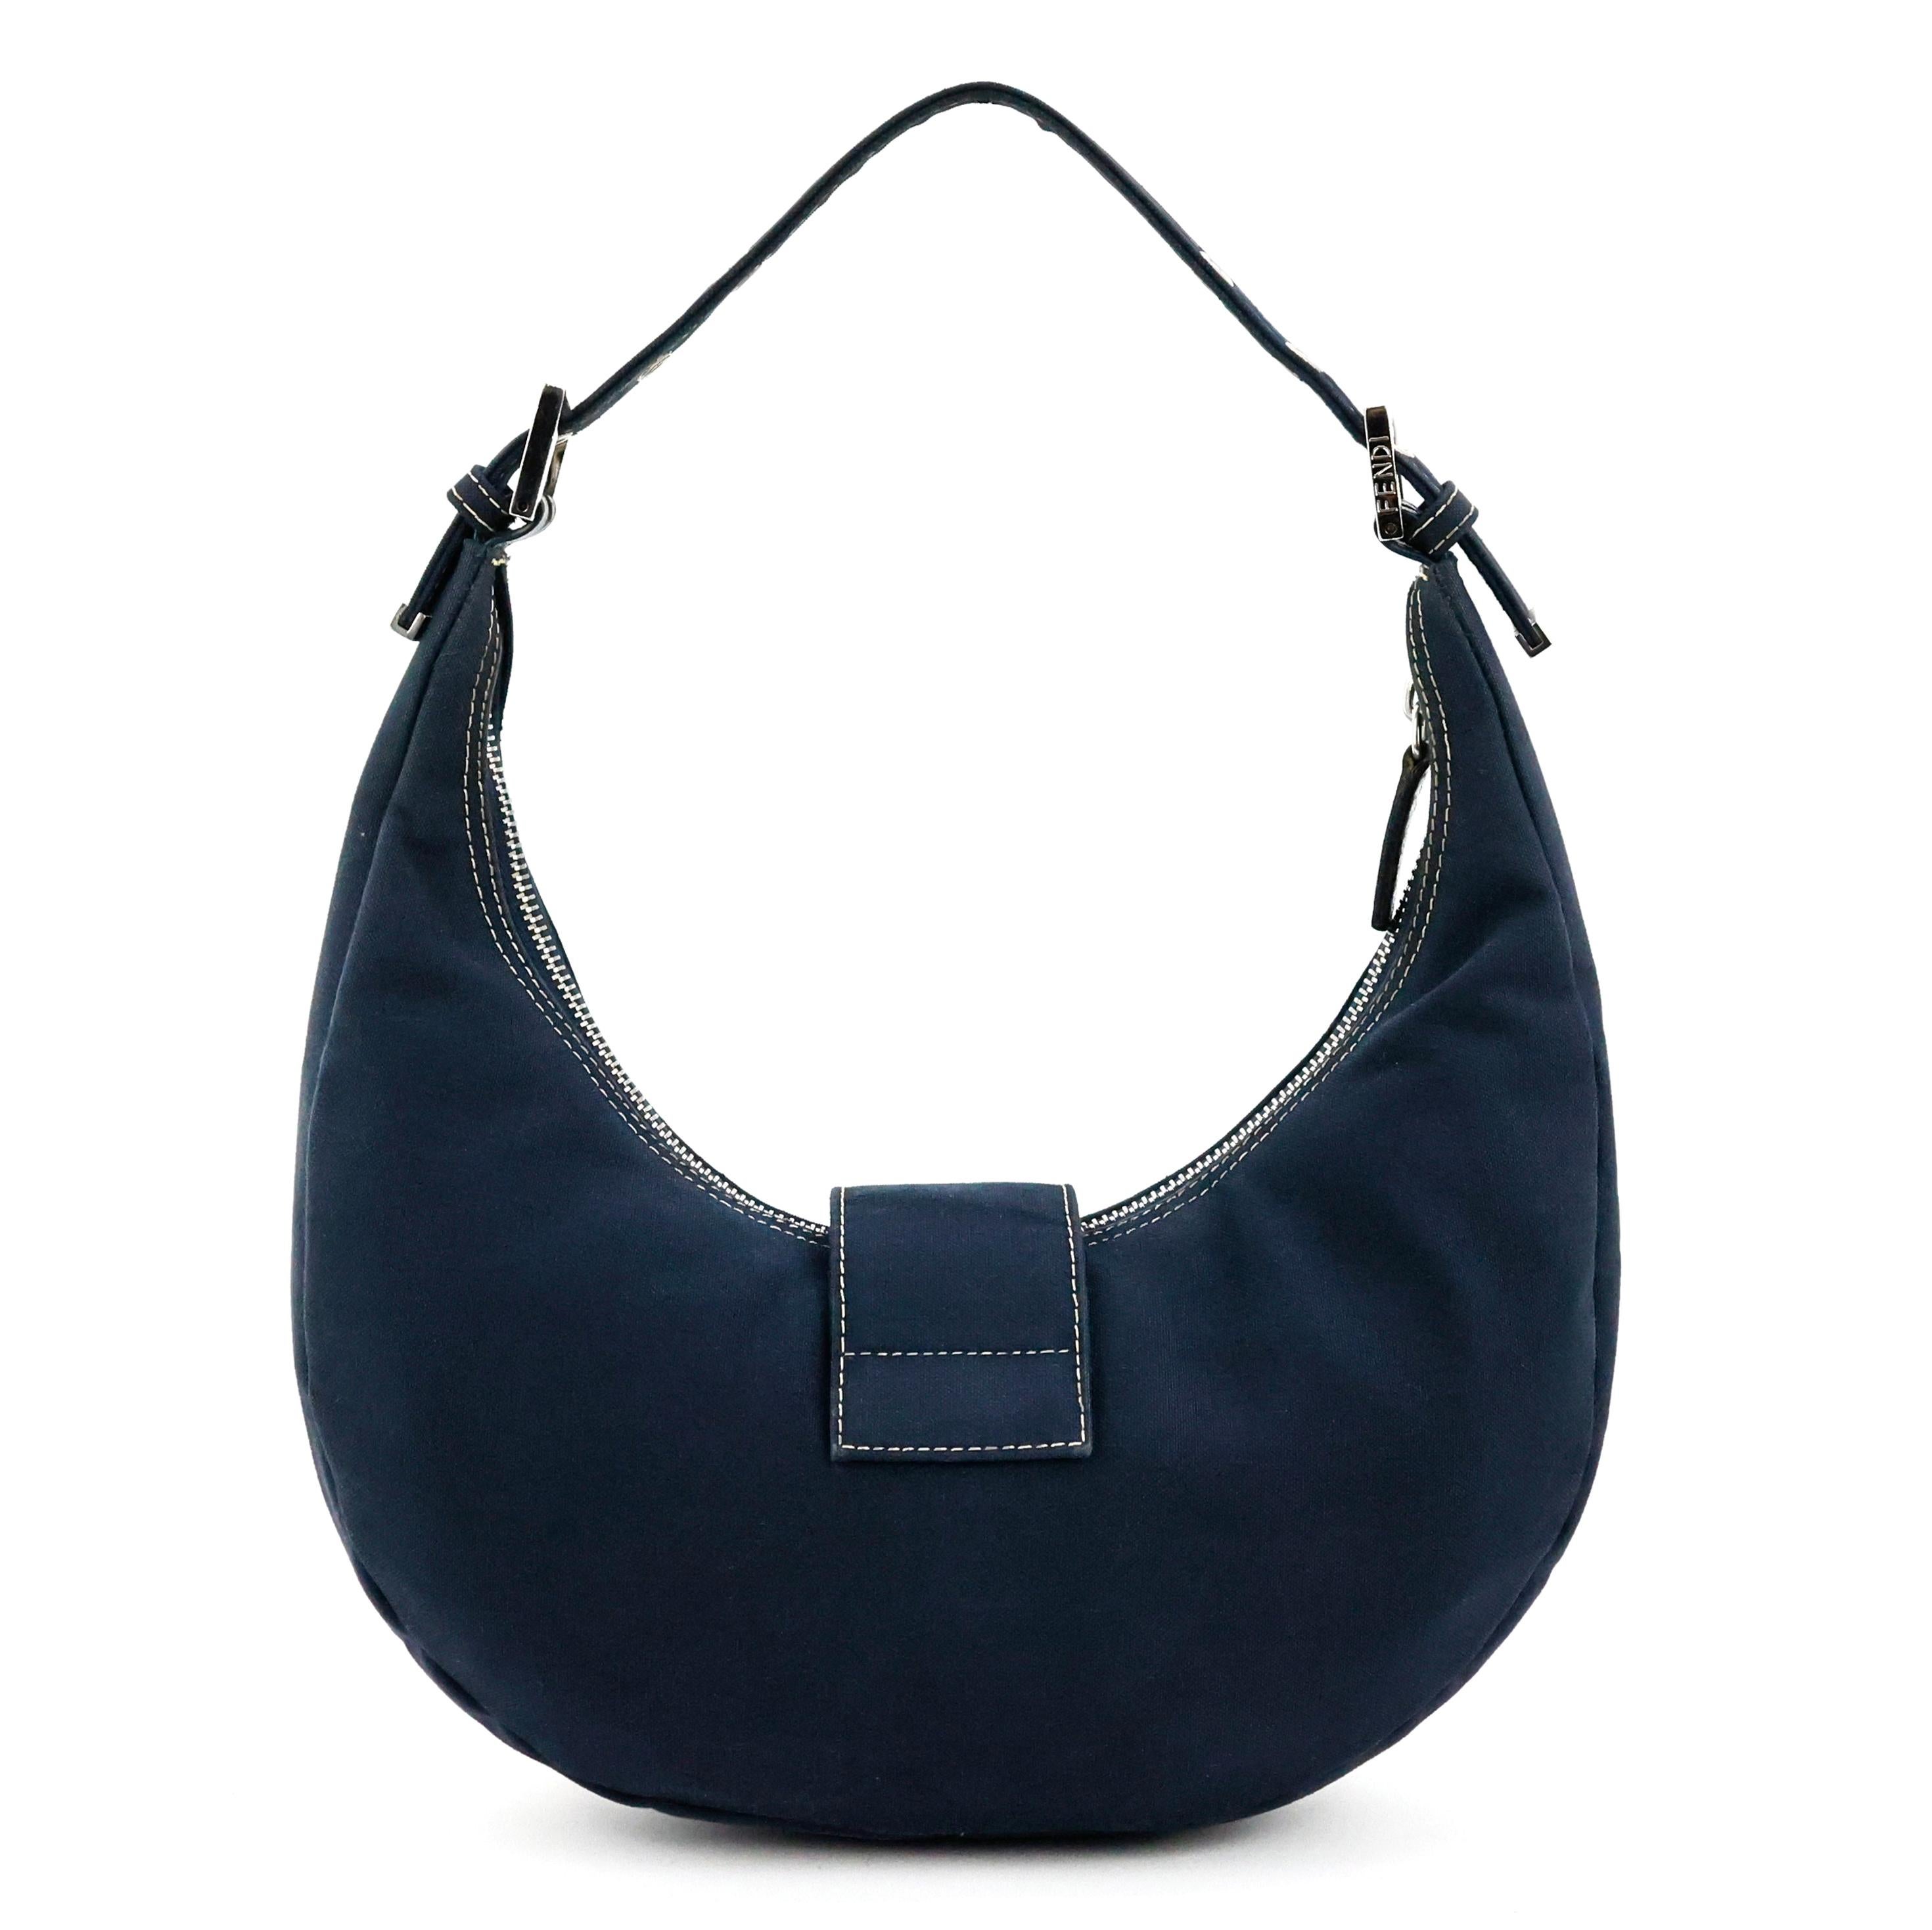 Fendi croissant baguette in navy blue denim, silver hardware.

Condition:
Good. Externally in really good condition, lining spotted internally. Clasp/Front logo still sealed, no scratches, like new.

Packing/accessories:
Dustbag.

Measurements:
25cm